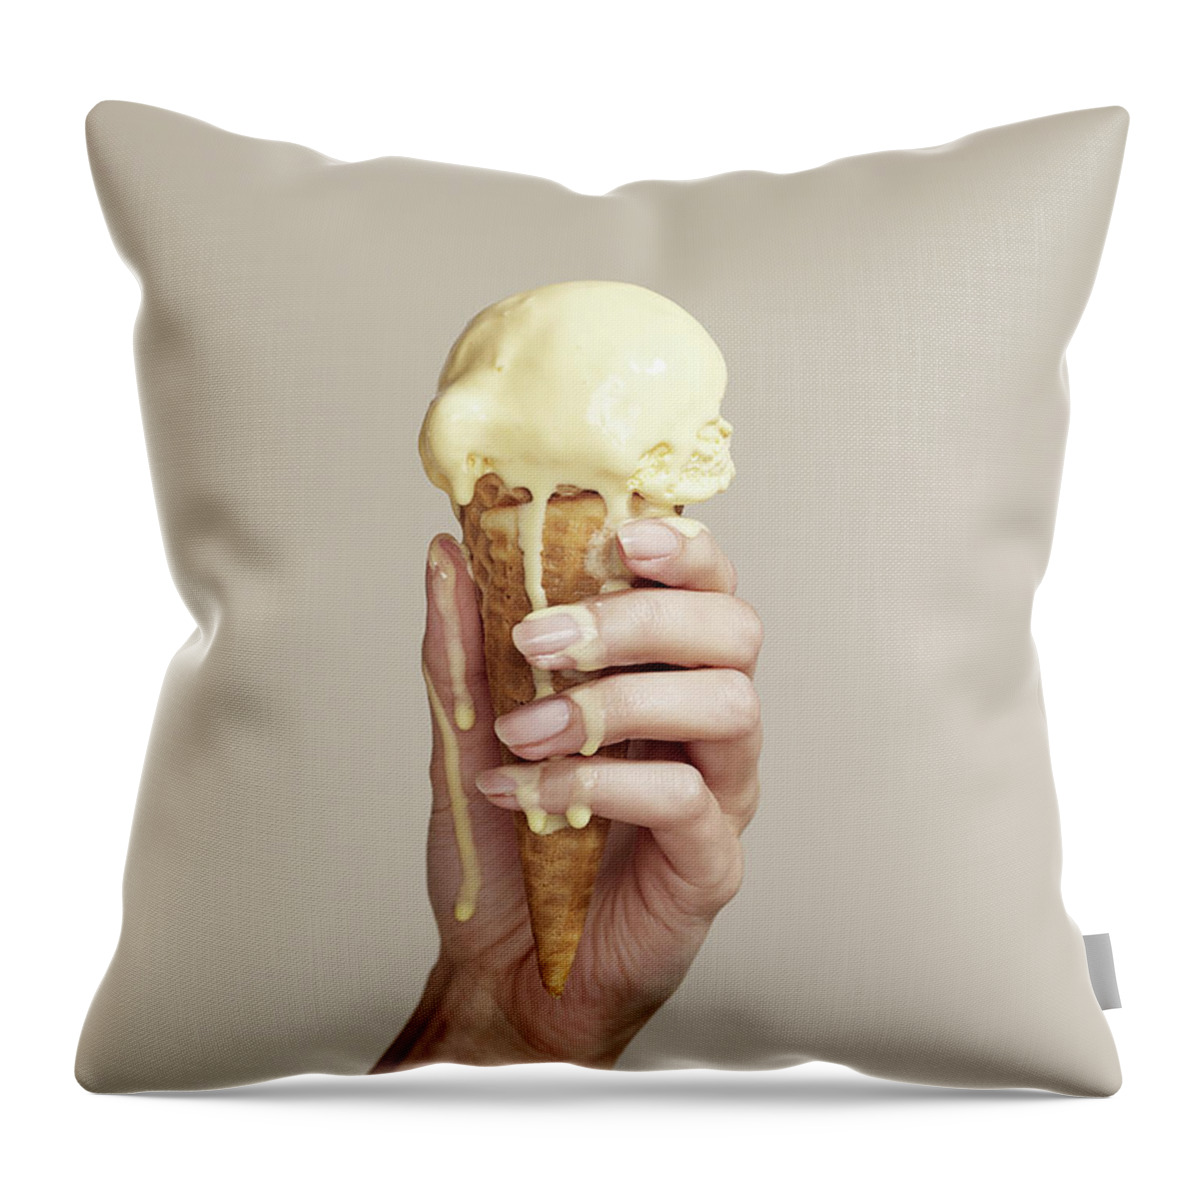 Melting Throw Pillow featuring the photograph Woman Holding Melting Ice Cream Cone by Walker And Walker